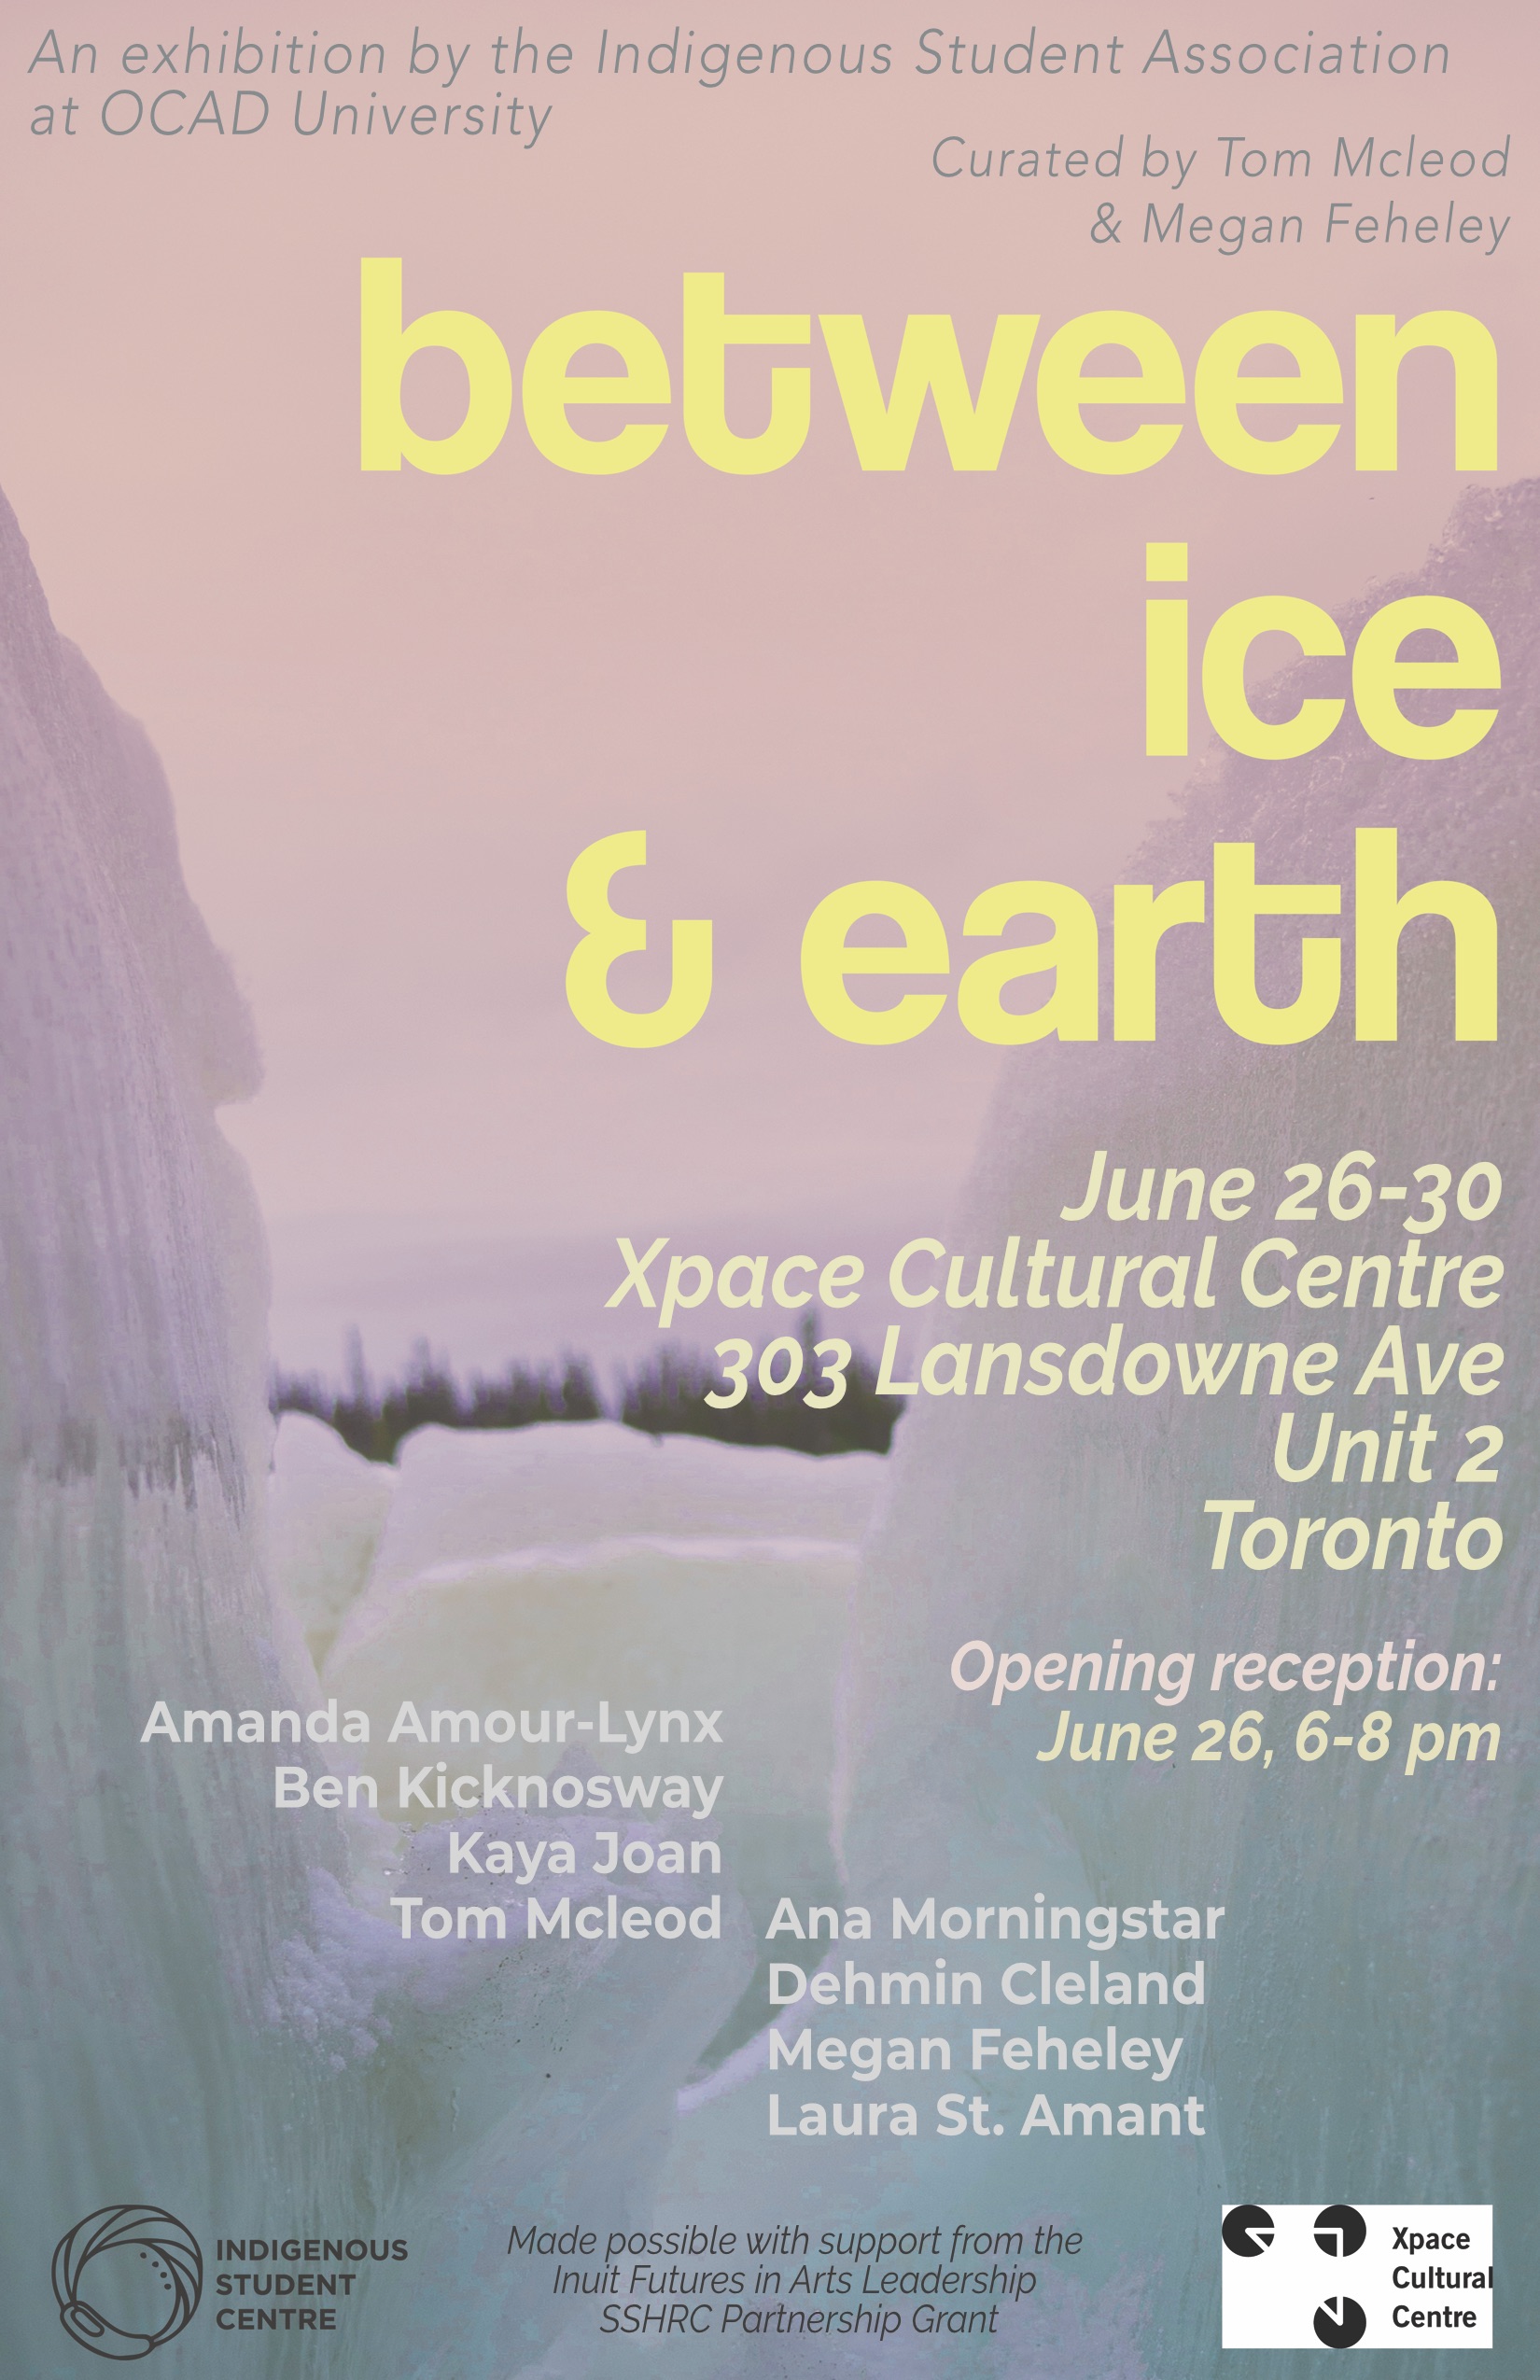   Between Ice &amp; Earth , an exhibition co-curated by Tom MeLeod of the Indigenous Student Association at OCAD University, Toronto. June 2019. 